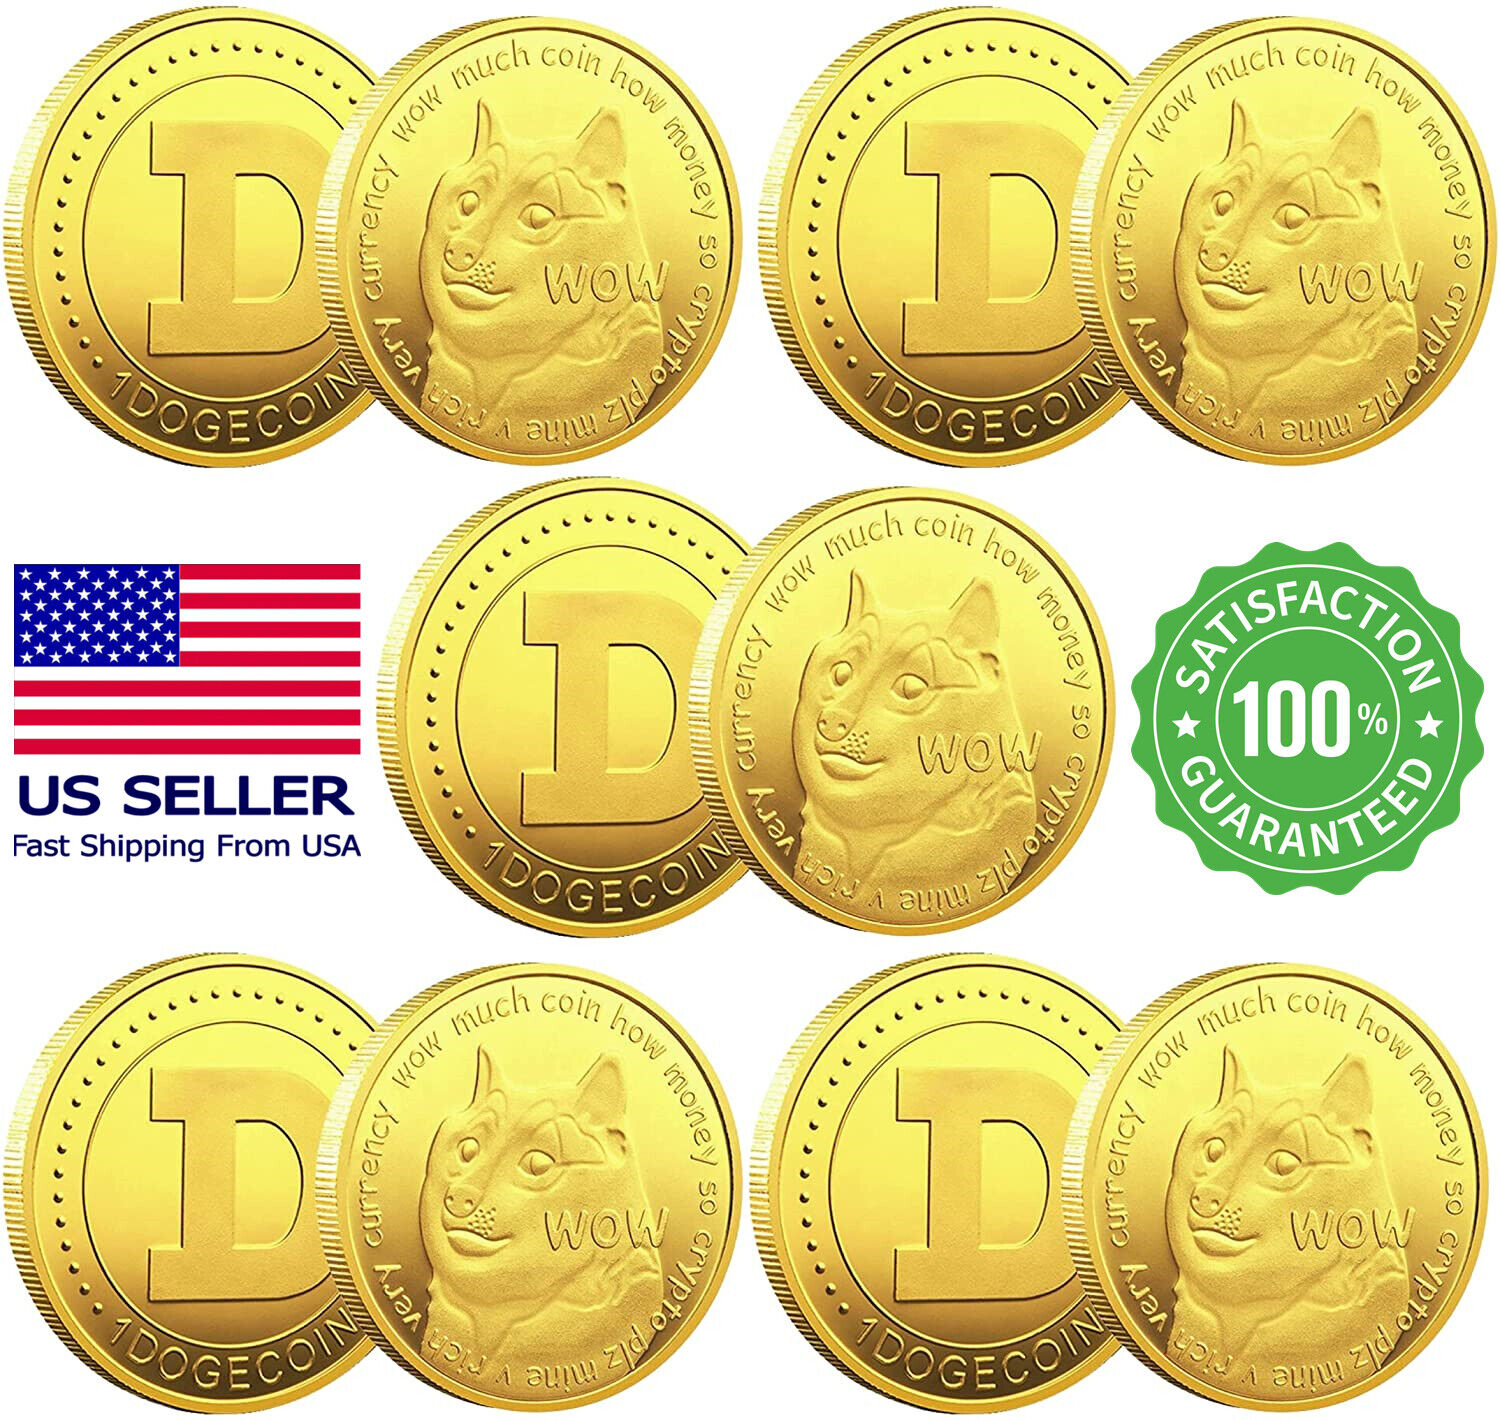 10Pcs Dogecoin Coins Commemorative Physical Crypto Gold Doge coins Collection